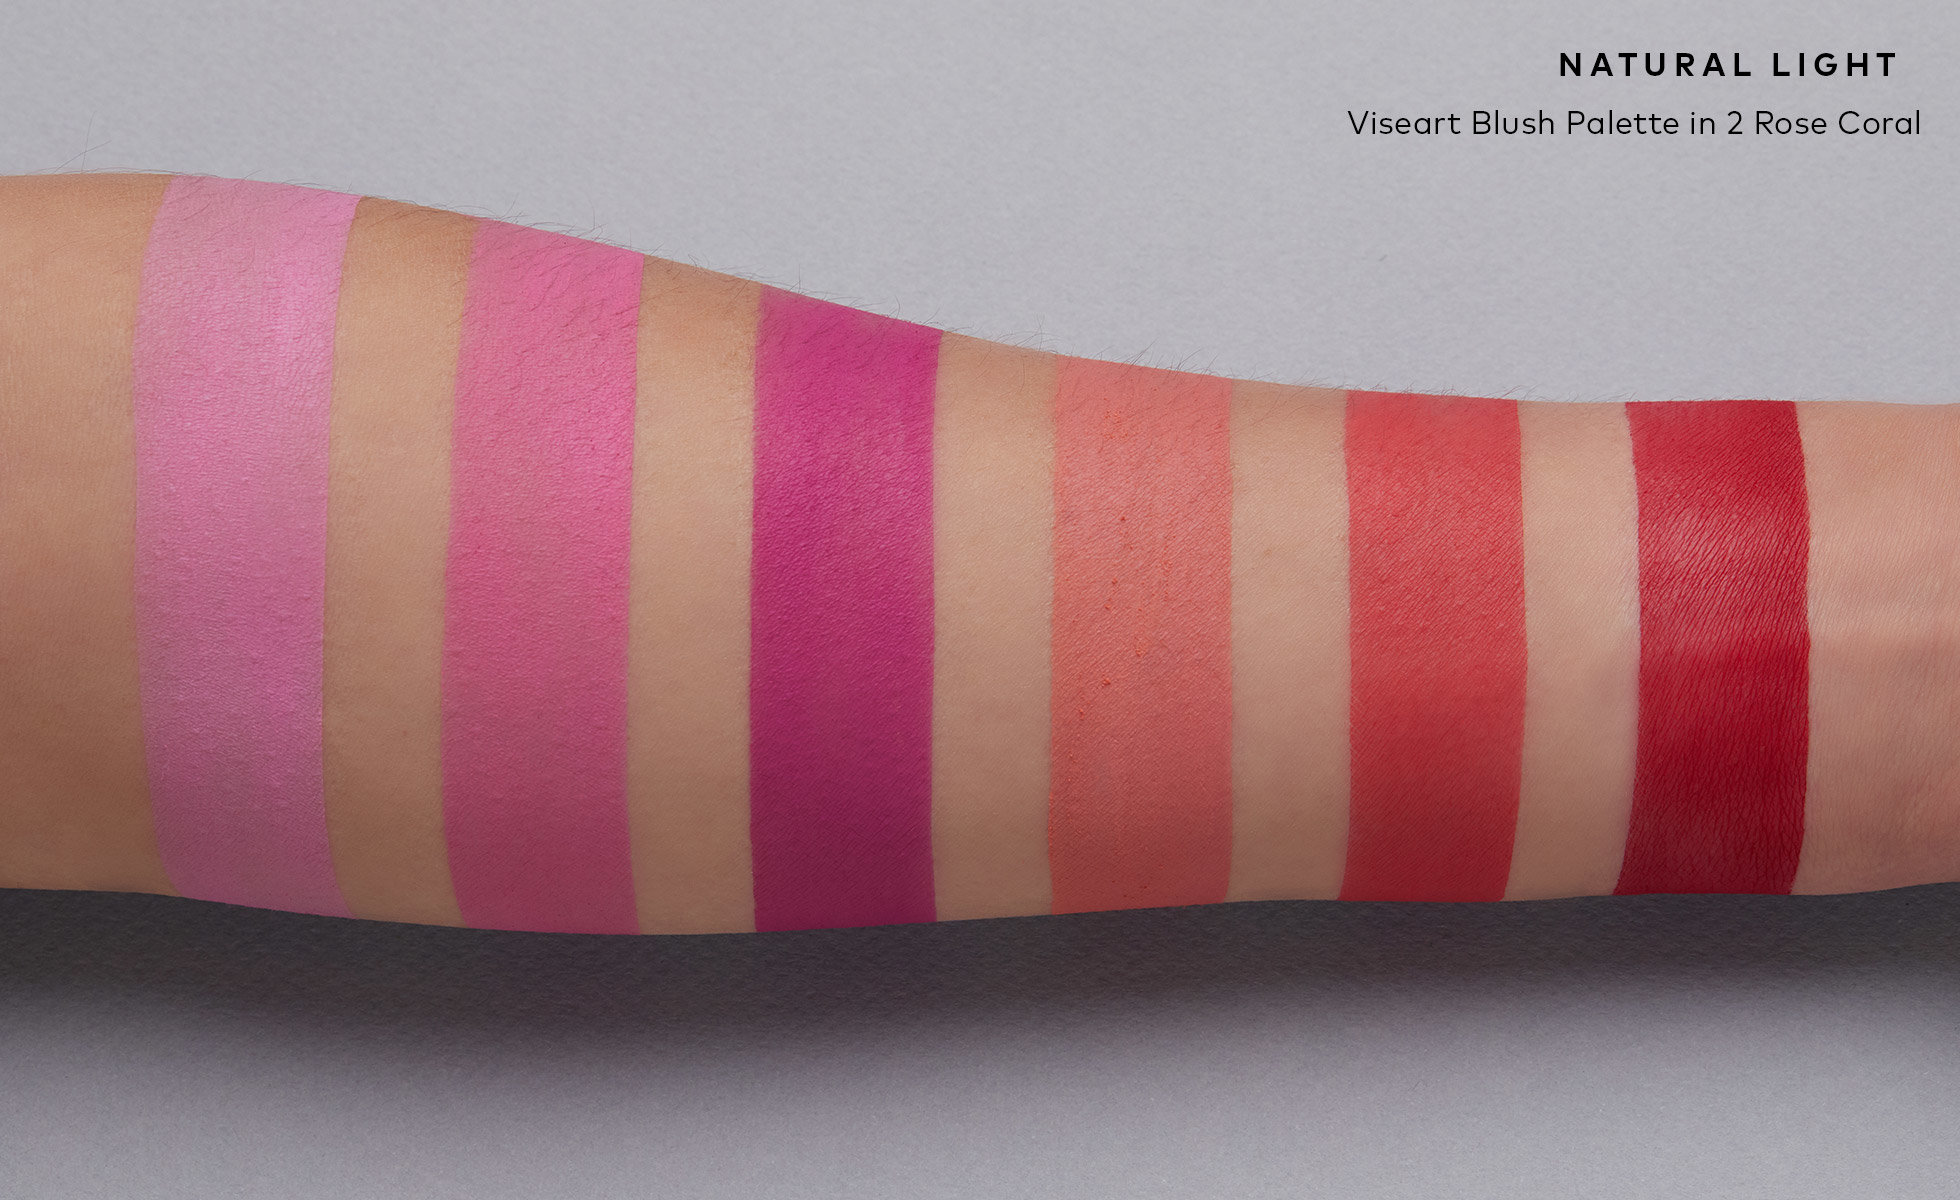 Viseart Blush Palette 2 Rose Coral Arm Swatches in natural lighting